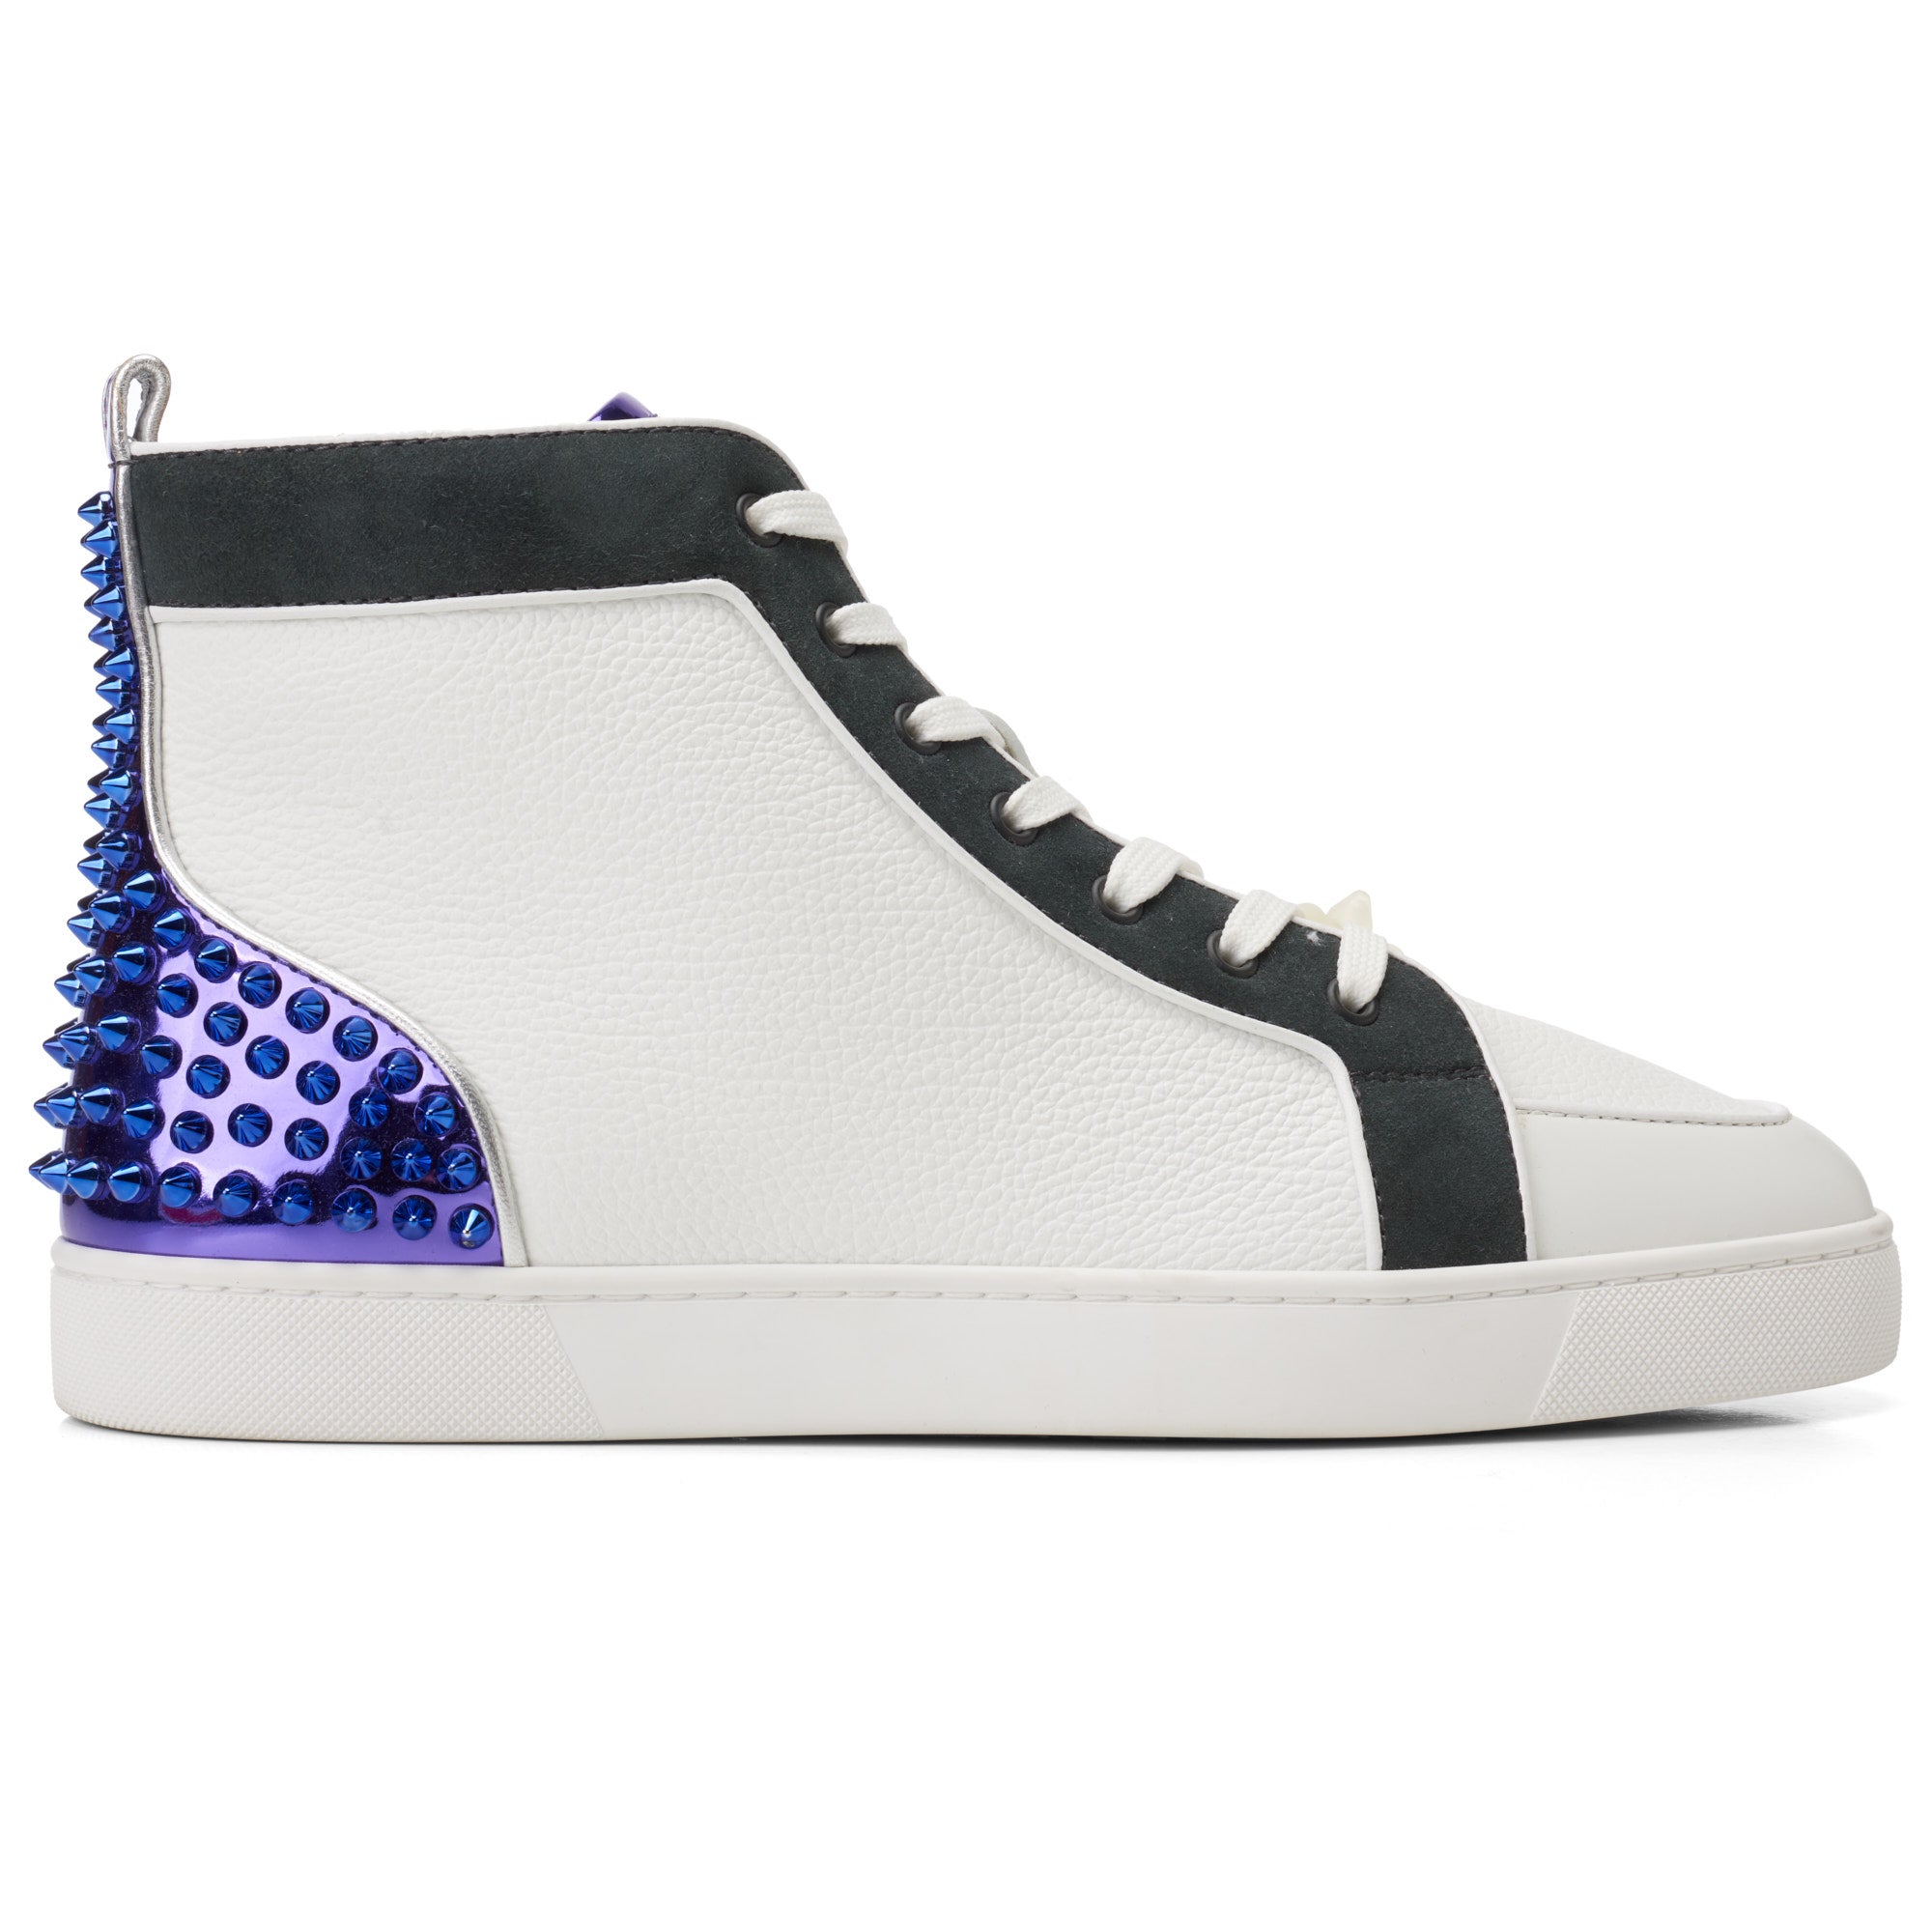 Christian Louboutin Black Patent Leather Louis Spikes High Top Sneakers  Size 43.5 Christian Louboutin